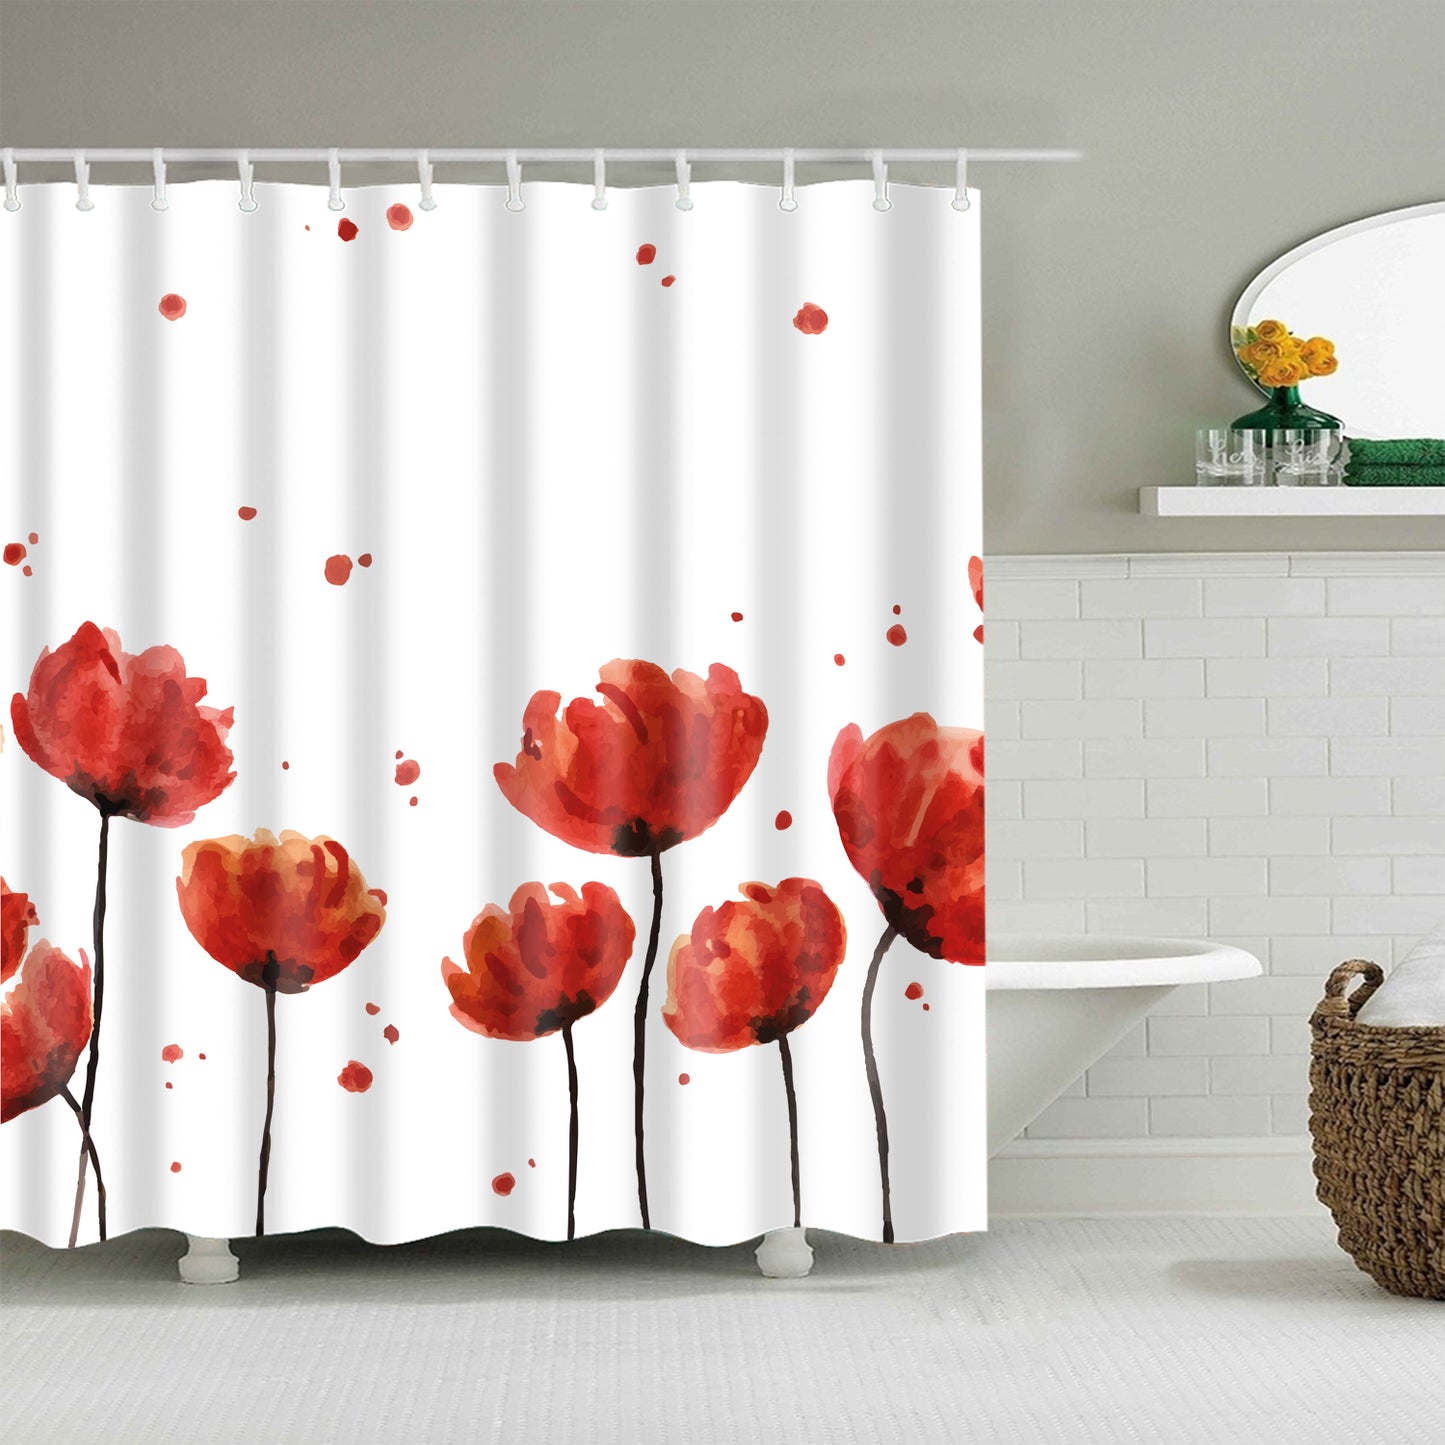 Oil Painting Red Opium Poppy Shower Curtain